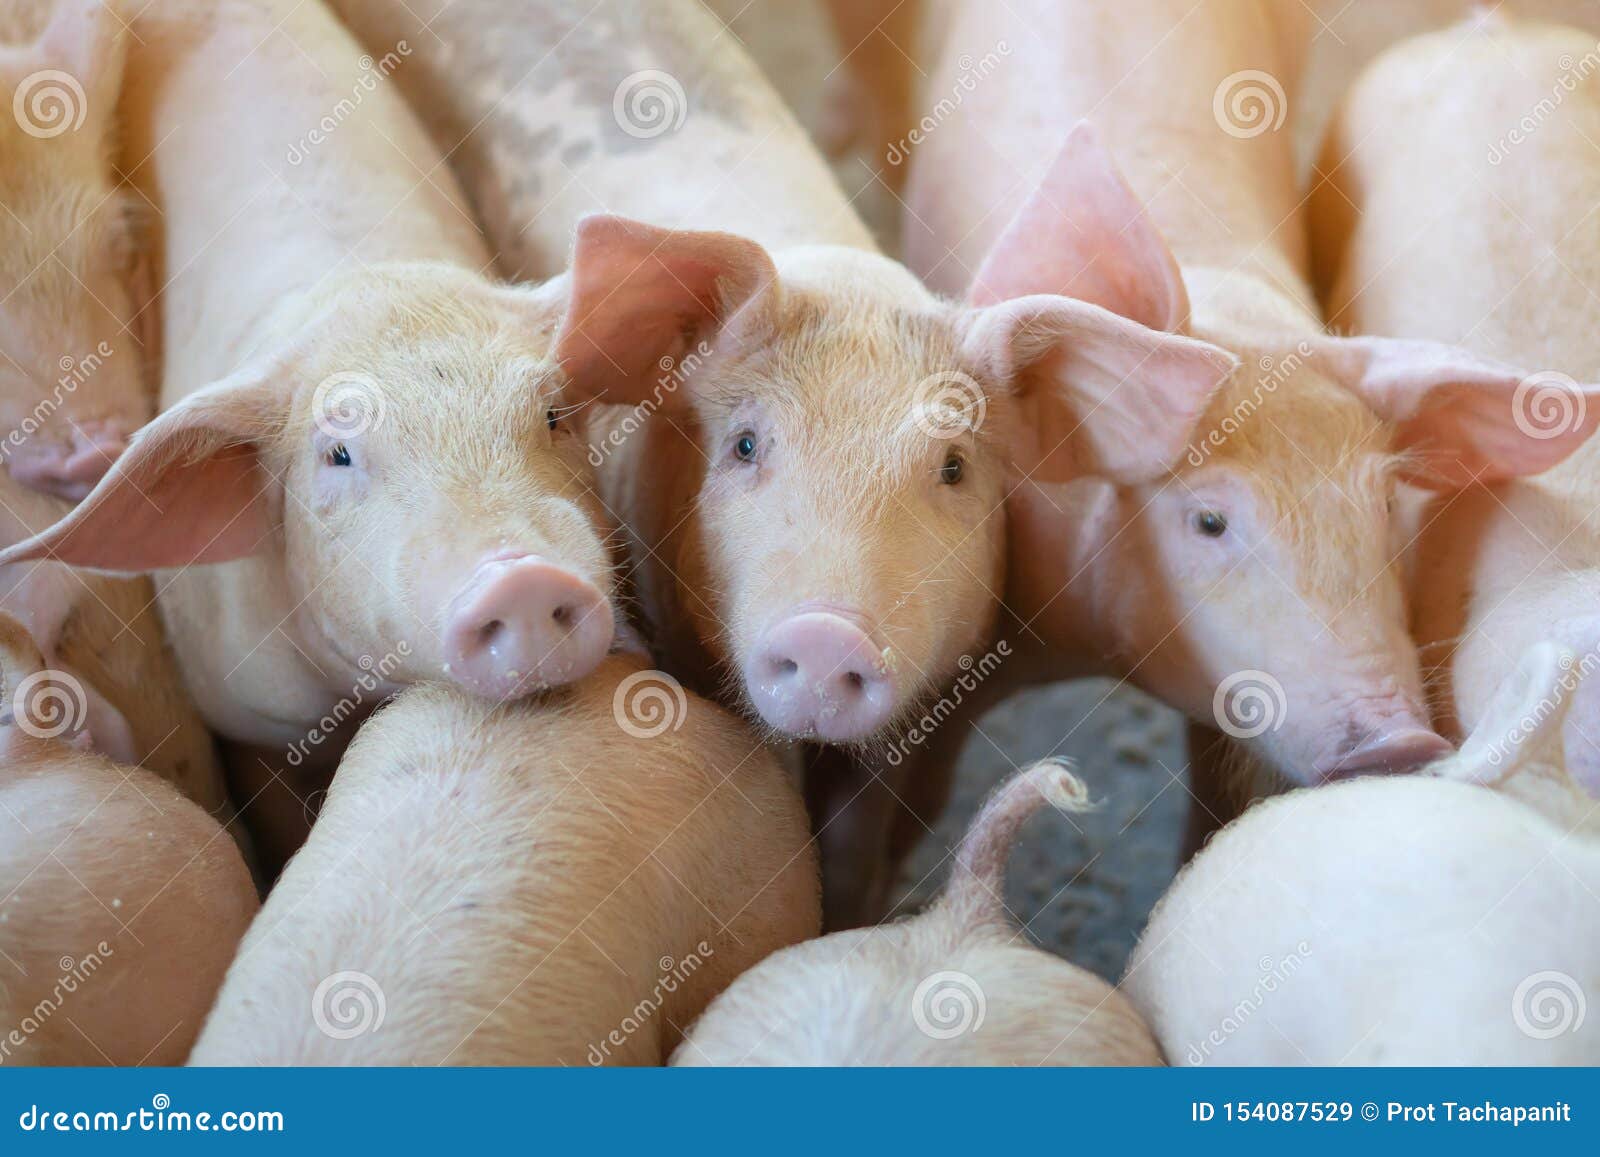 group of pig that looks healthy in local asean pig farm at livestock. the concept of standardized and clean farming without local